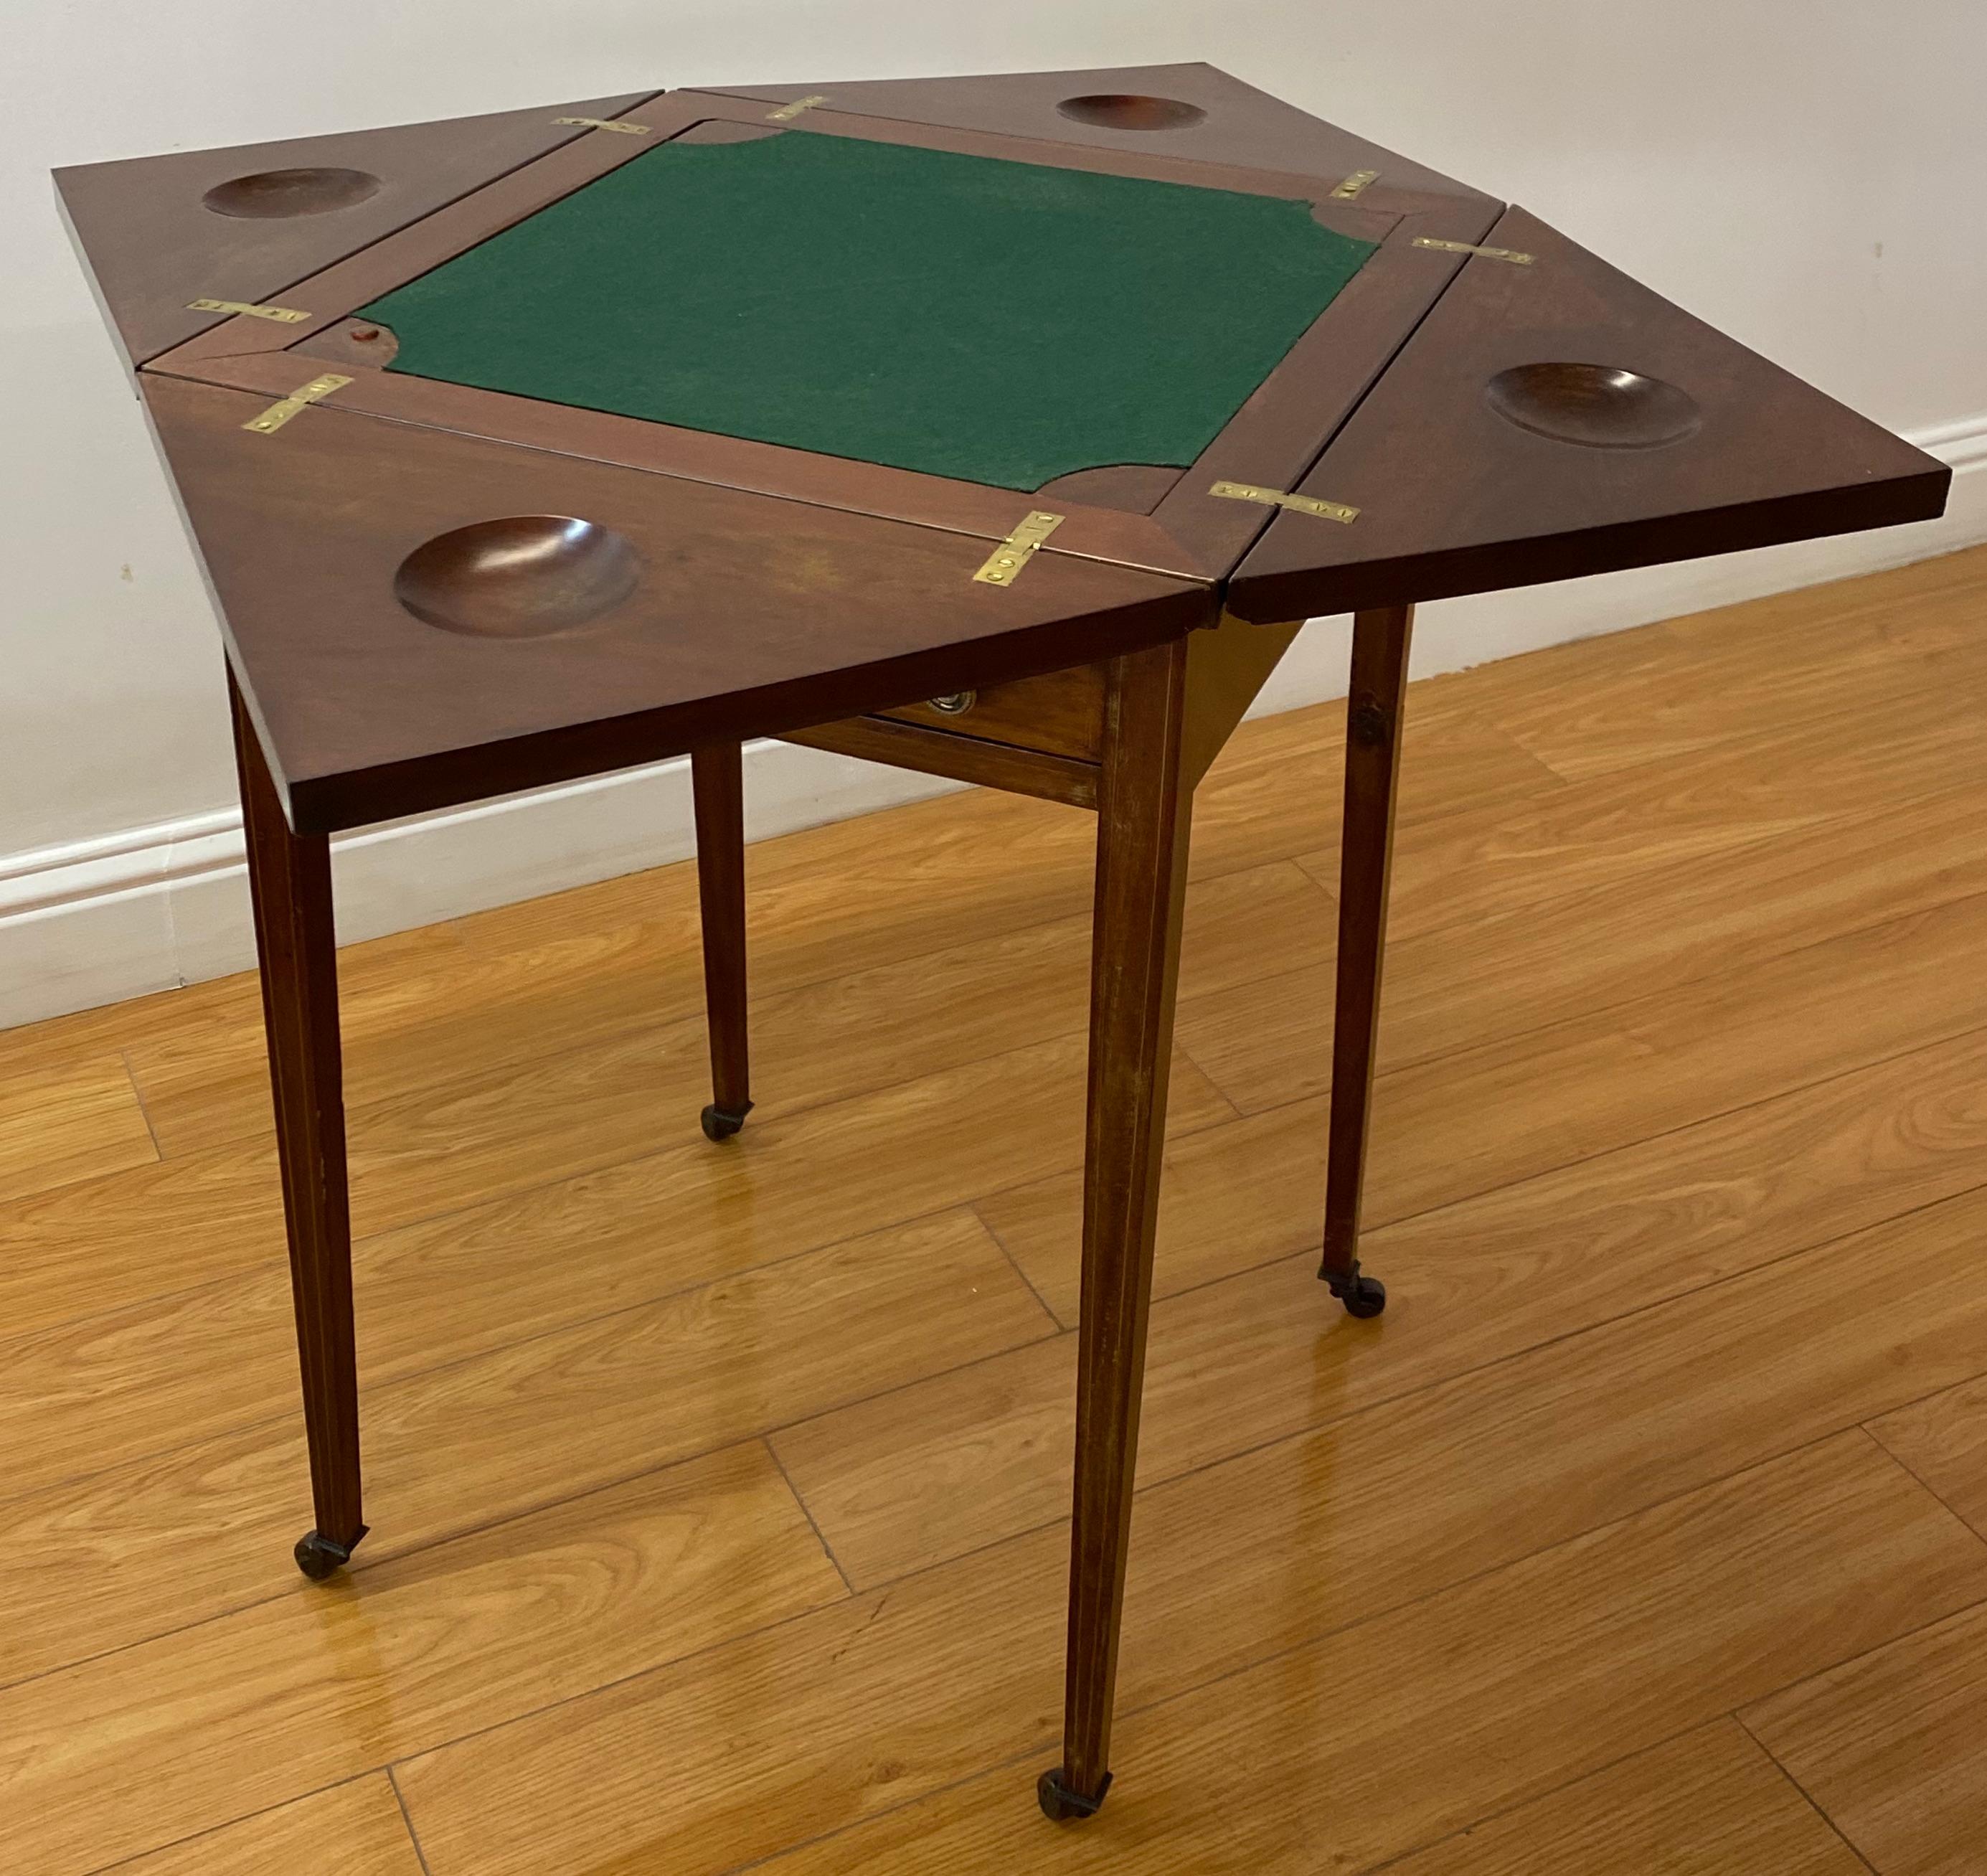 20th Century Vintage Inlaid Mahogany Handkerchief Folding Games / Side Table, C.1940 For Sale